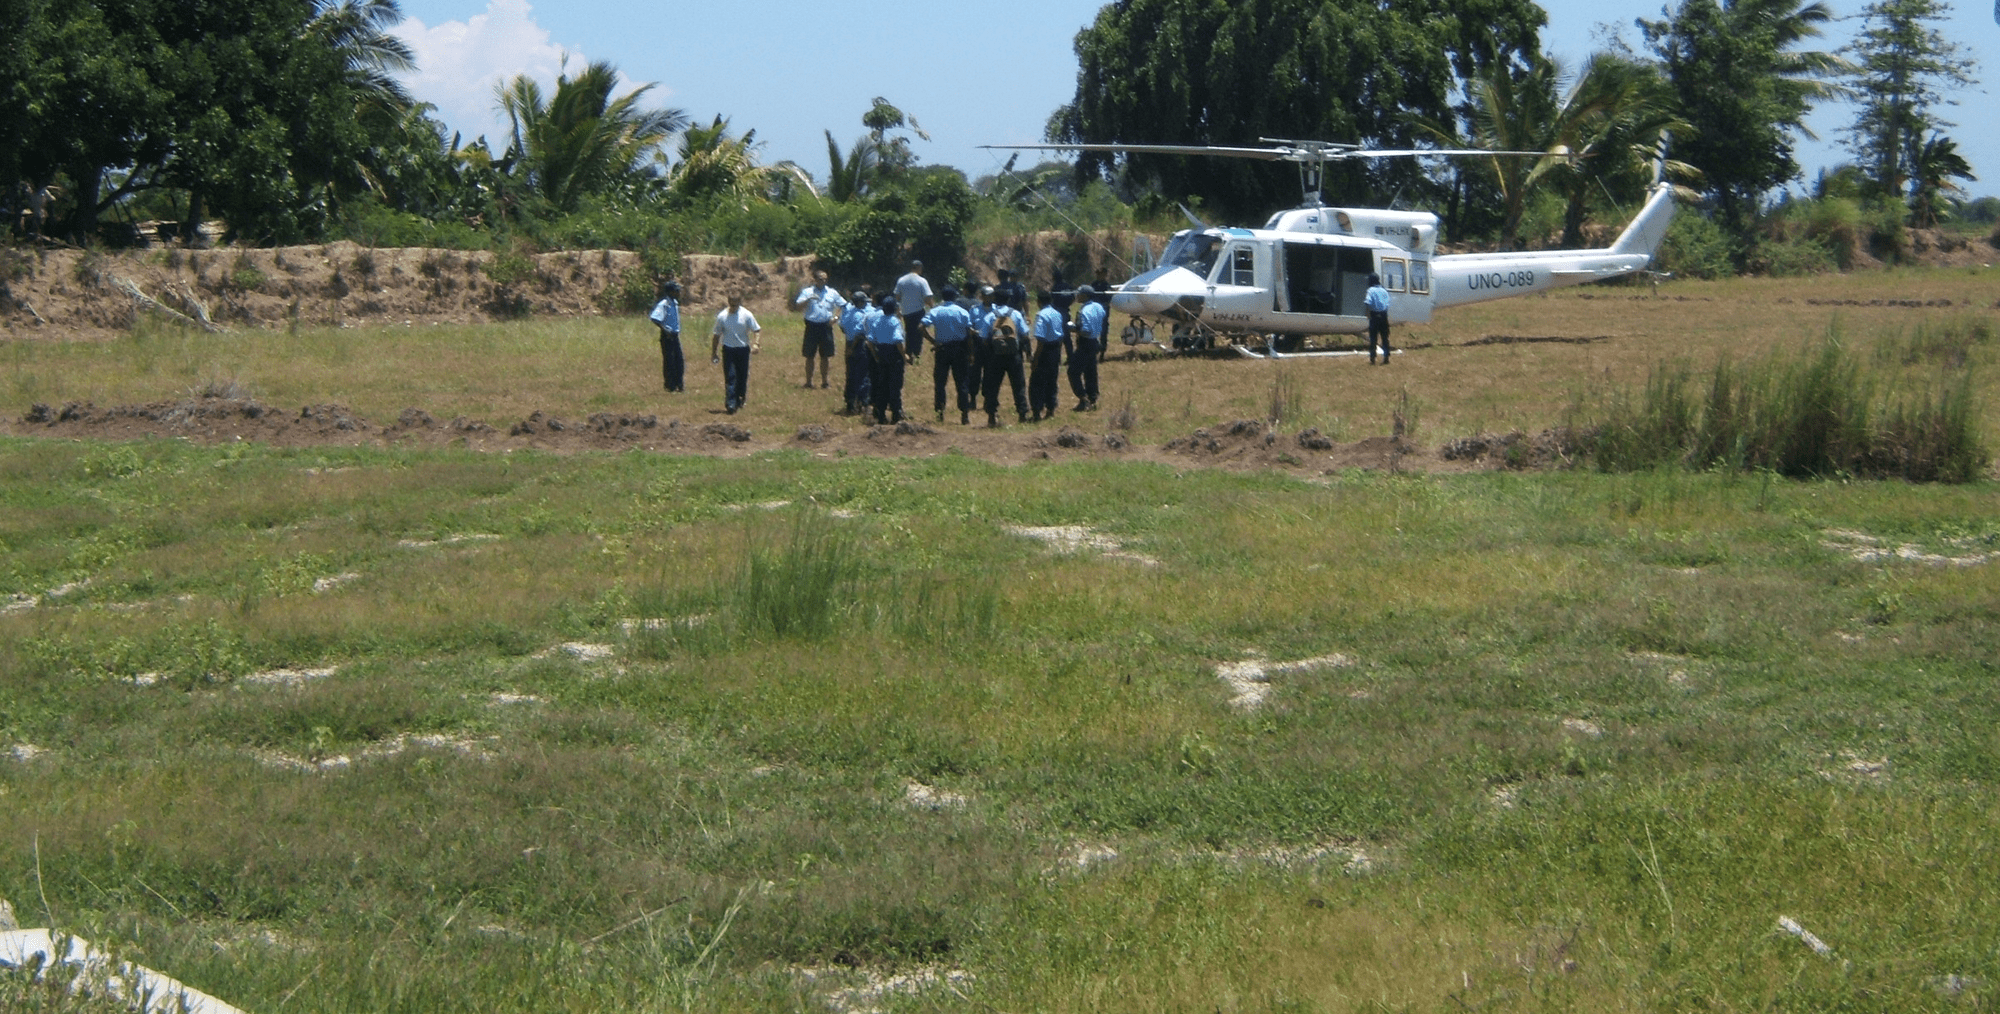 Helicopter Landing Zone and Training ground